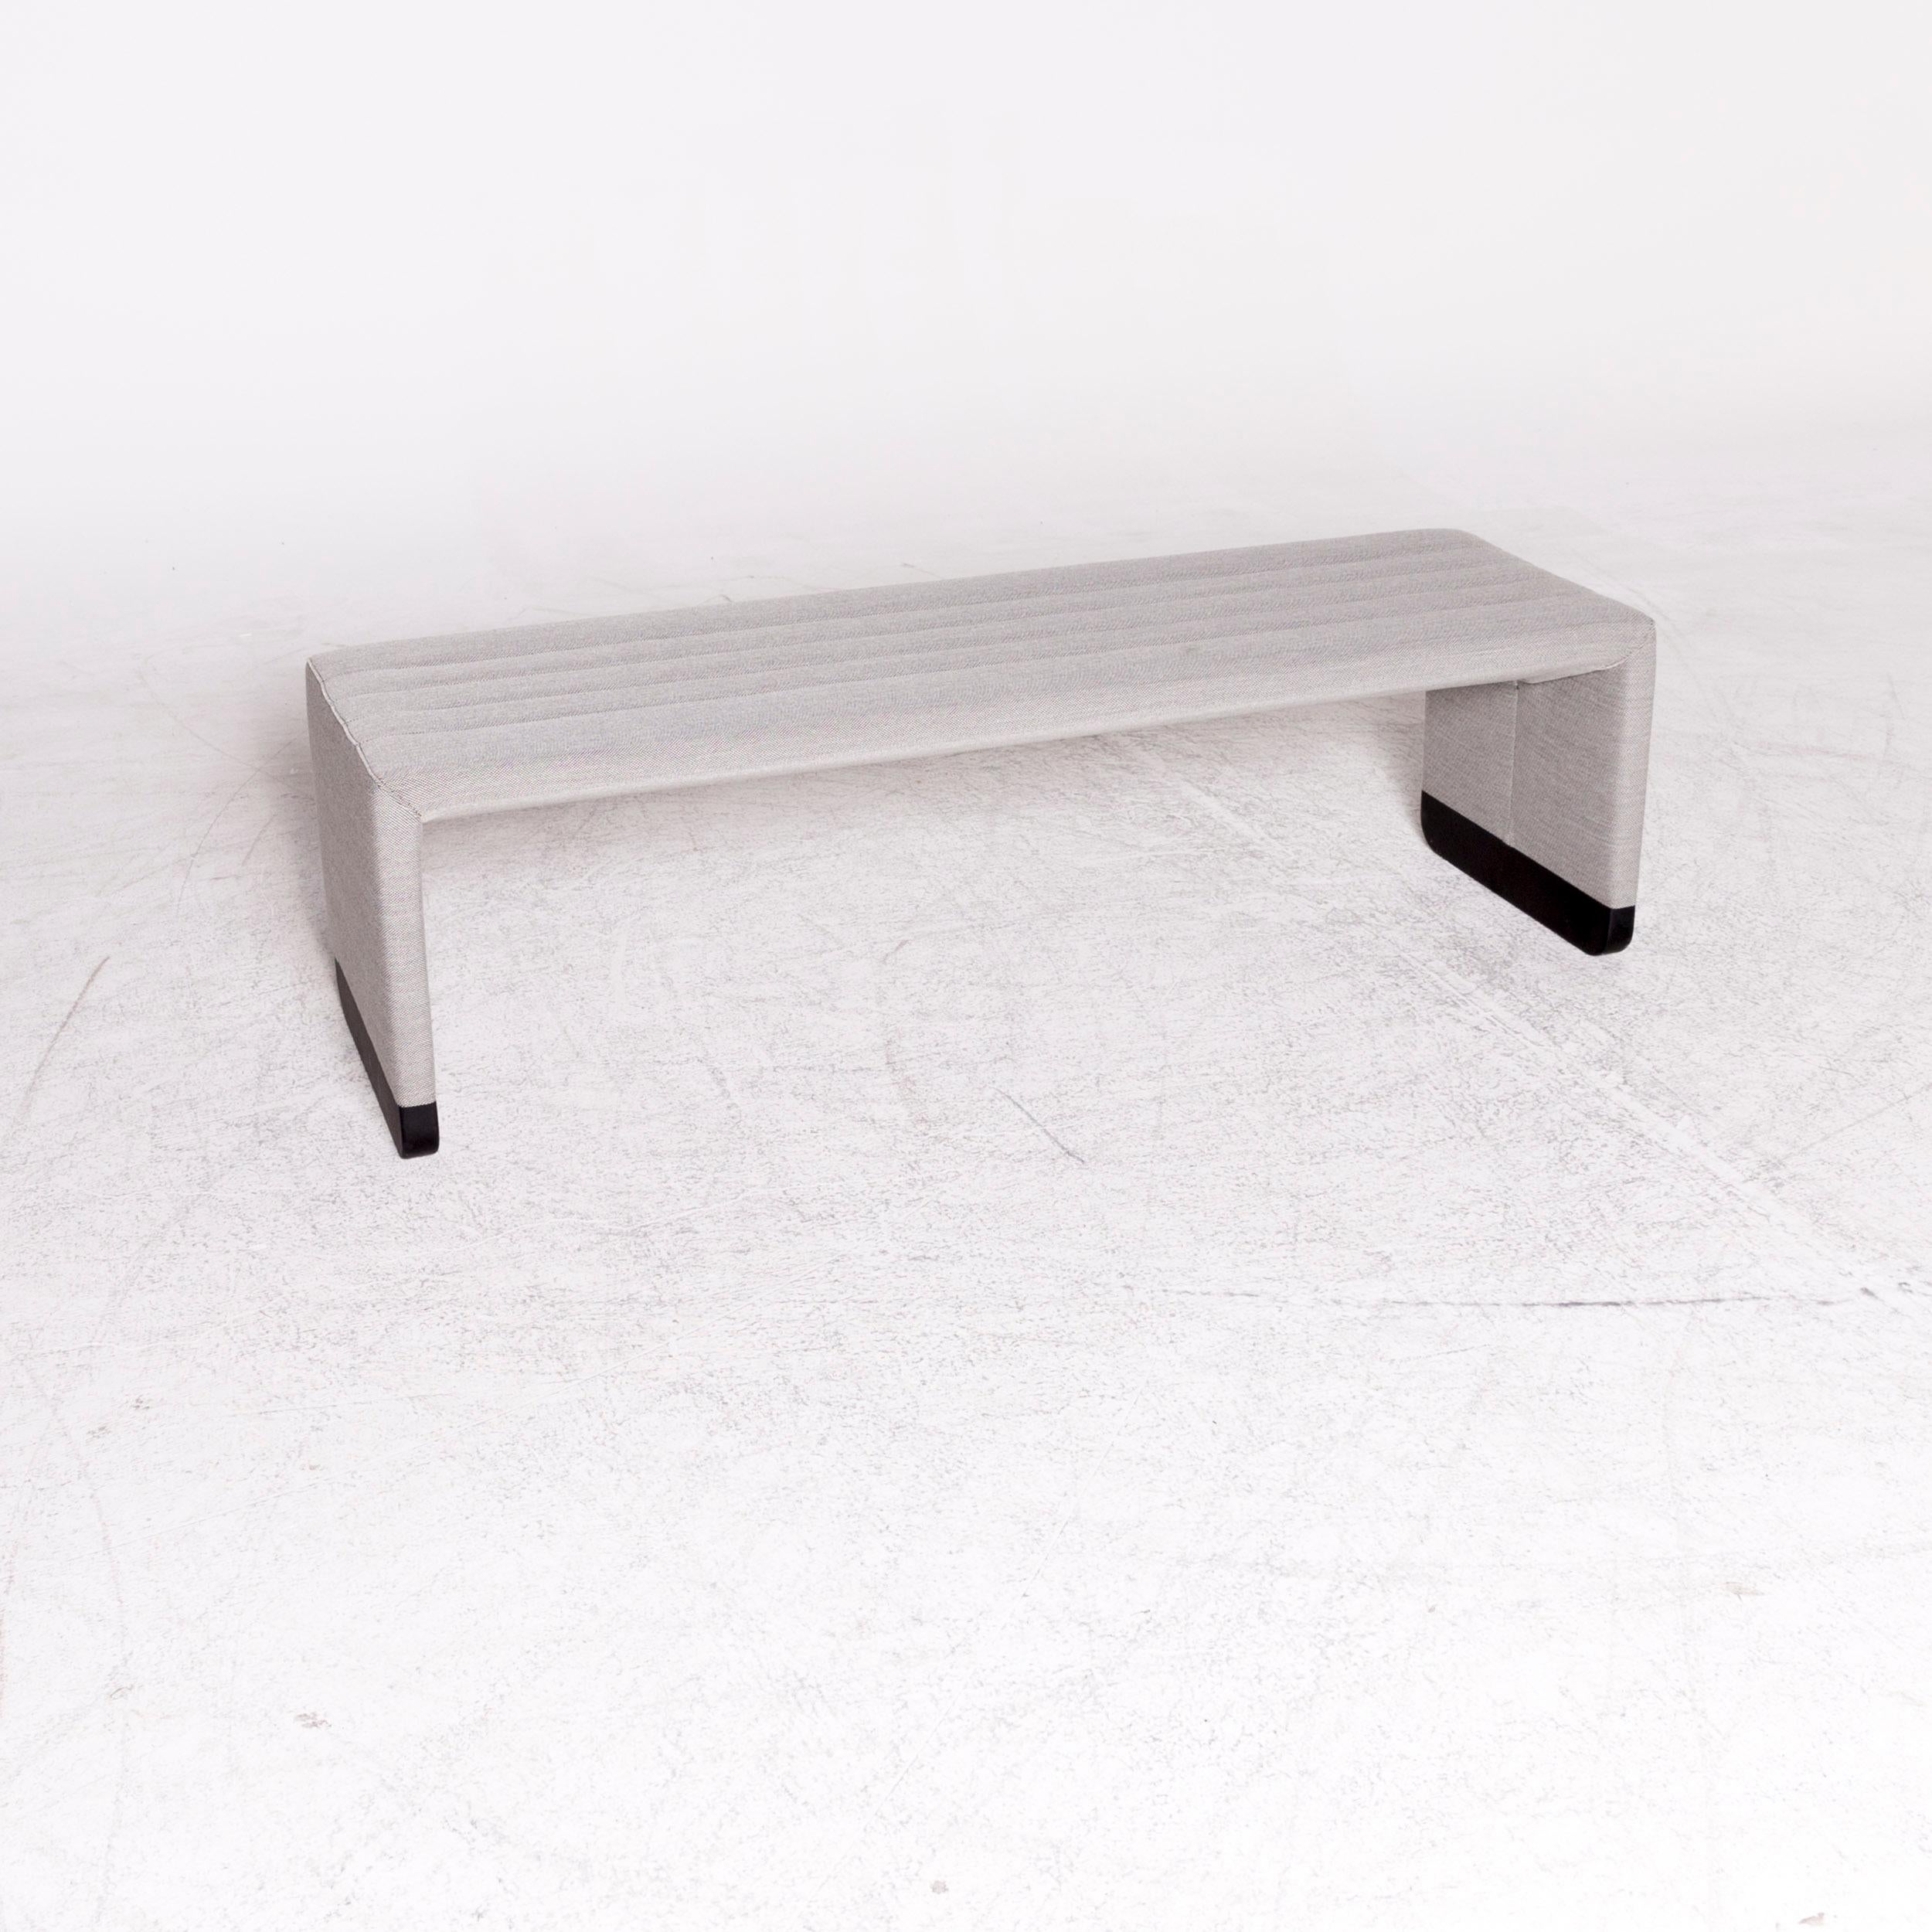 We bring to you a COR Bridge designer fabric stool bench gray stool bench stool.
 
Product measures in centimeters:

Depth: 51
Width: 160
Height: 48.





 